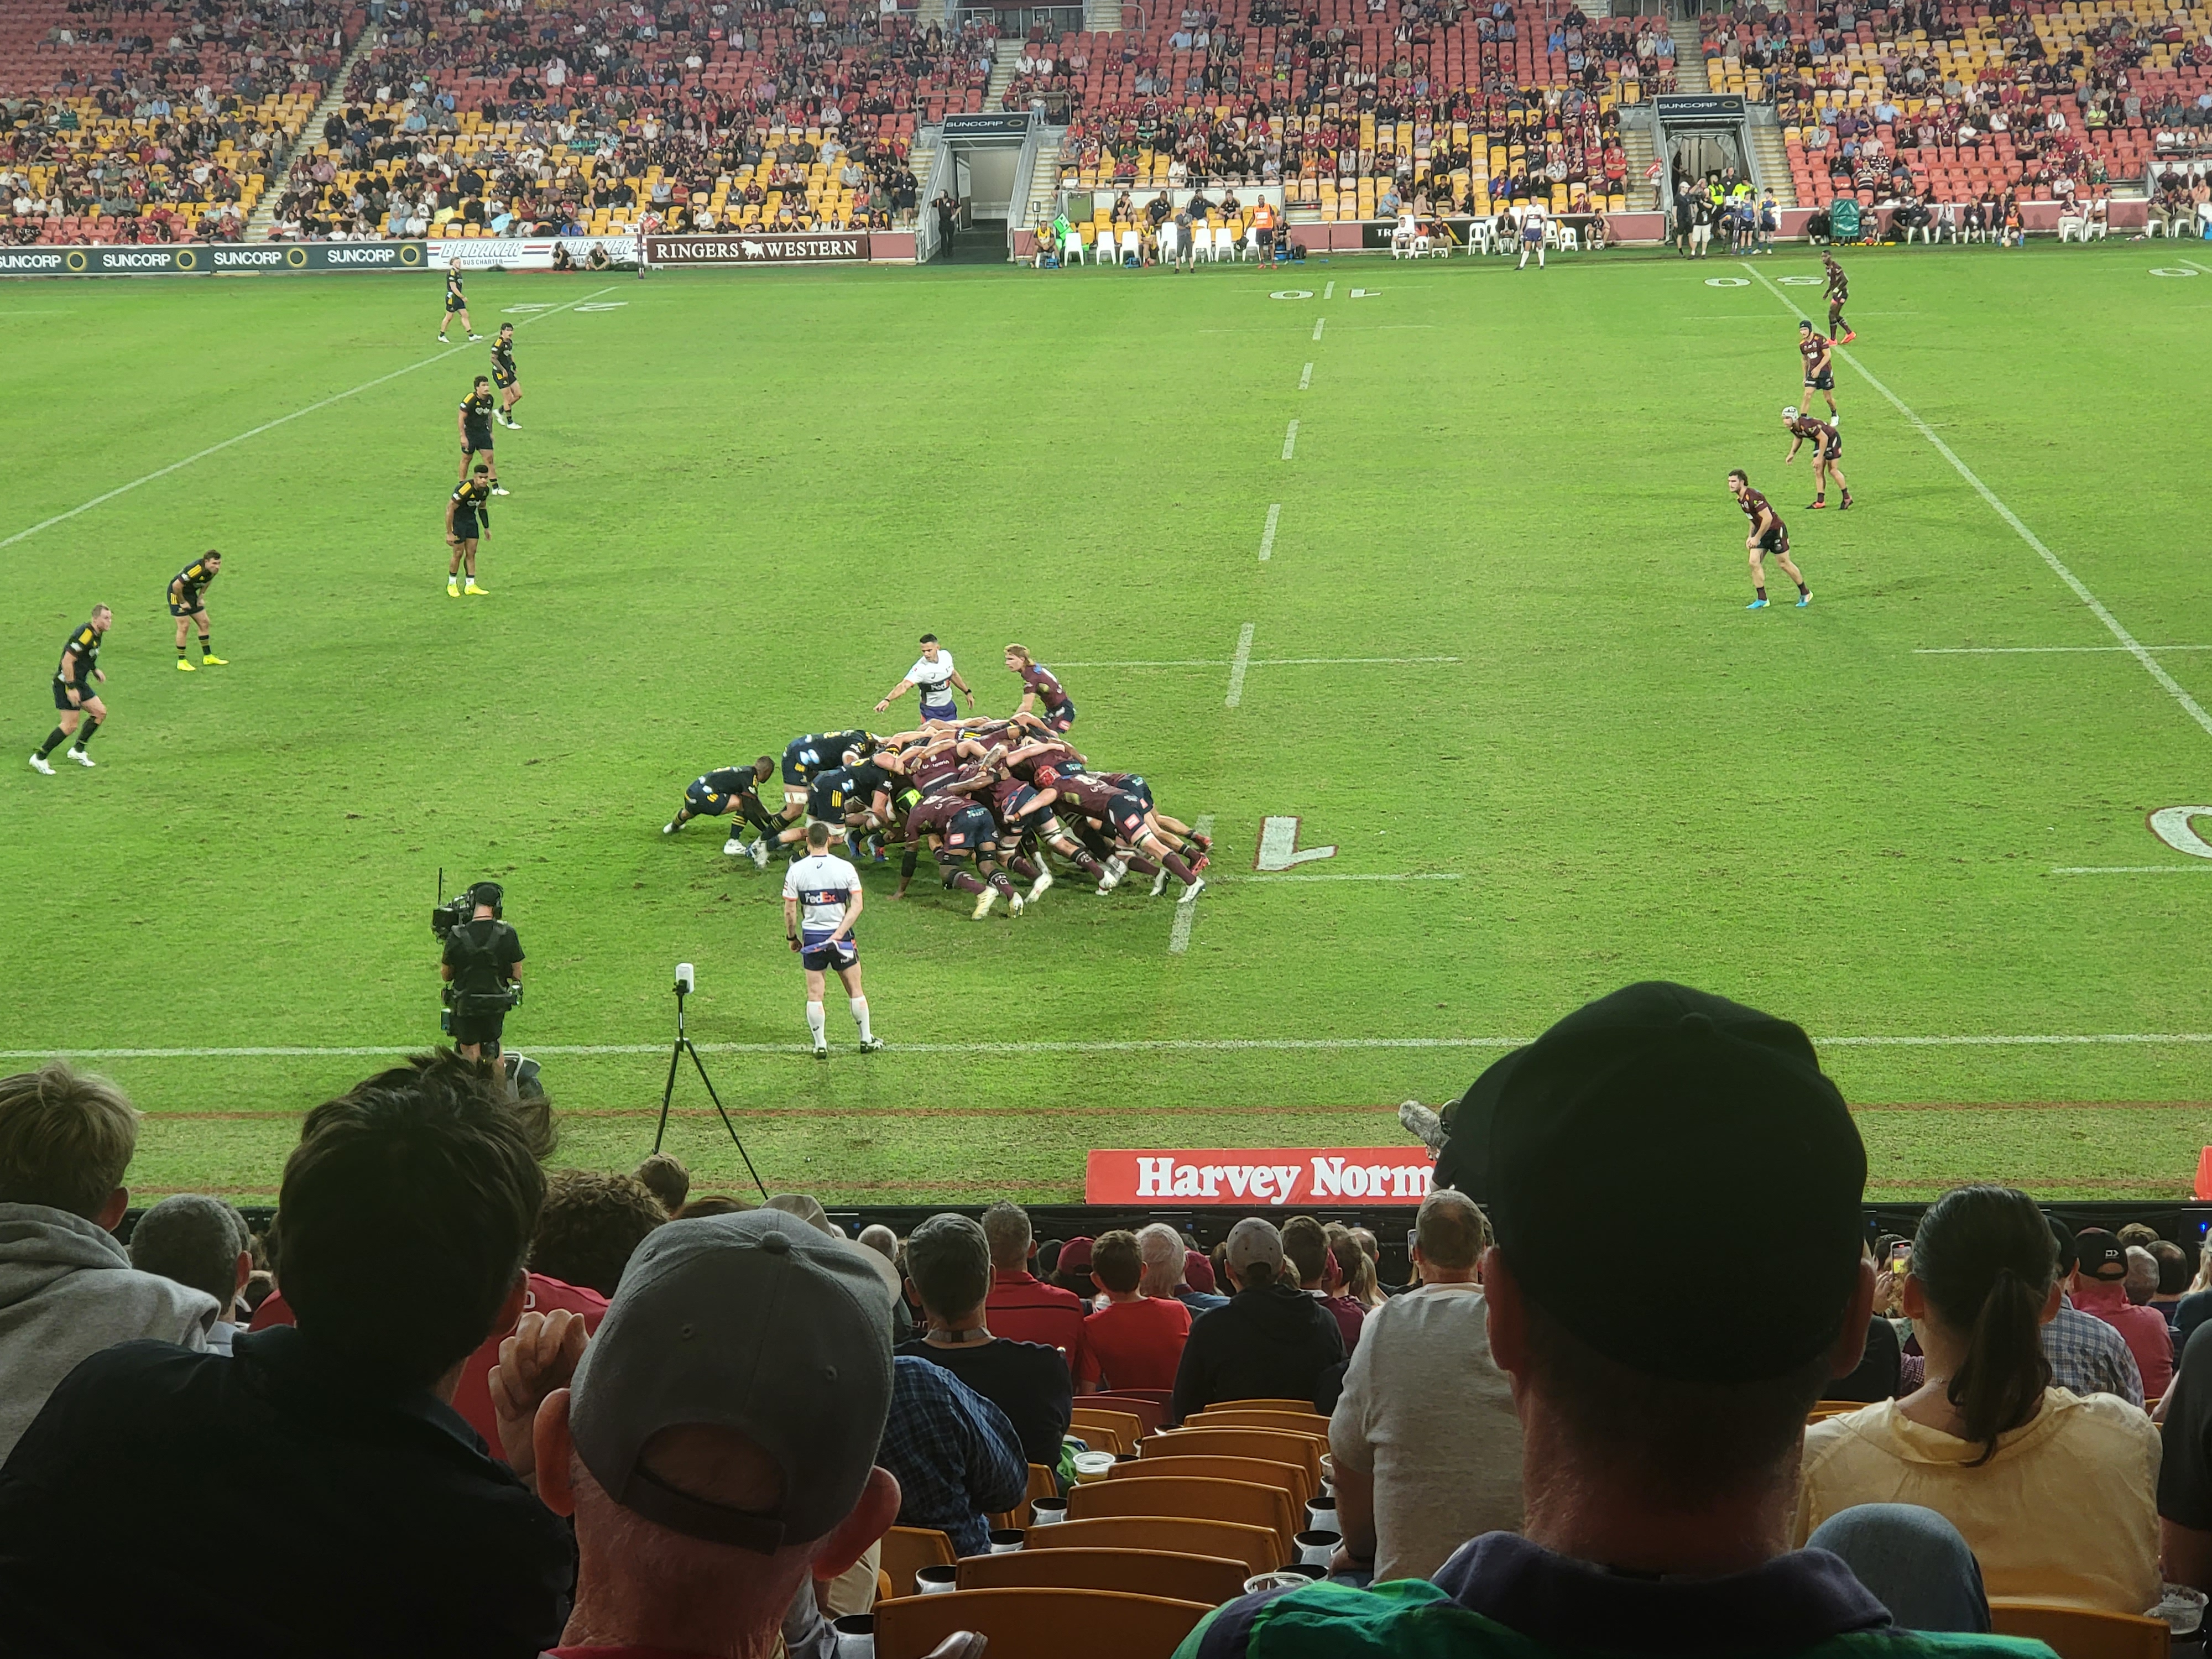 My second home - Suncorp